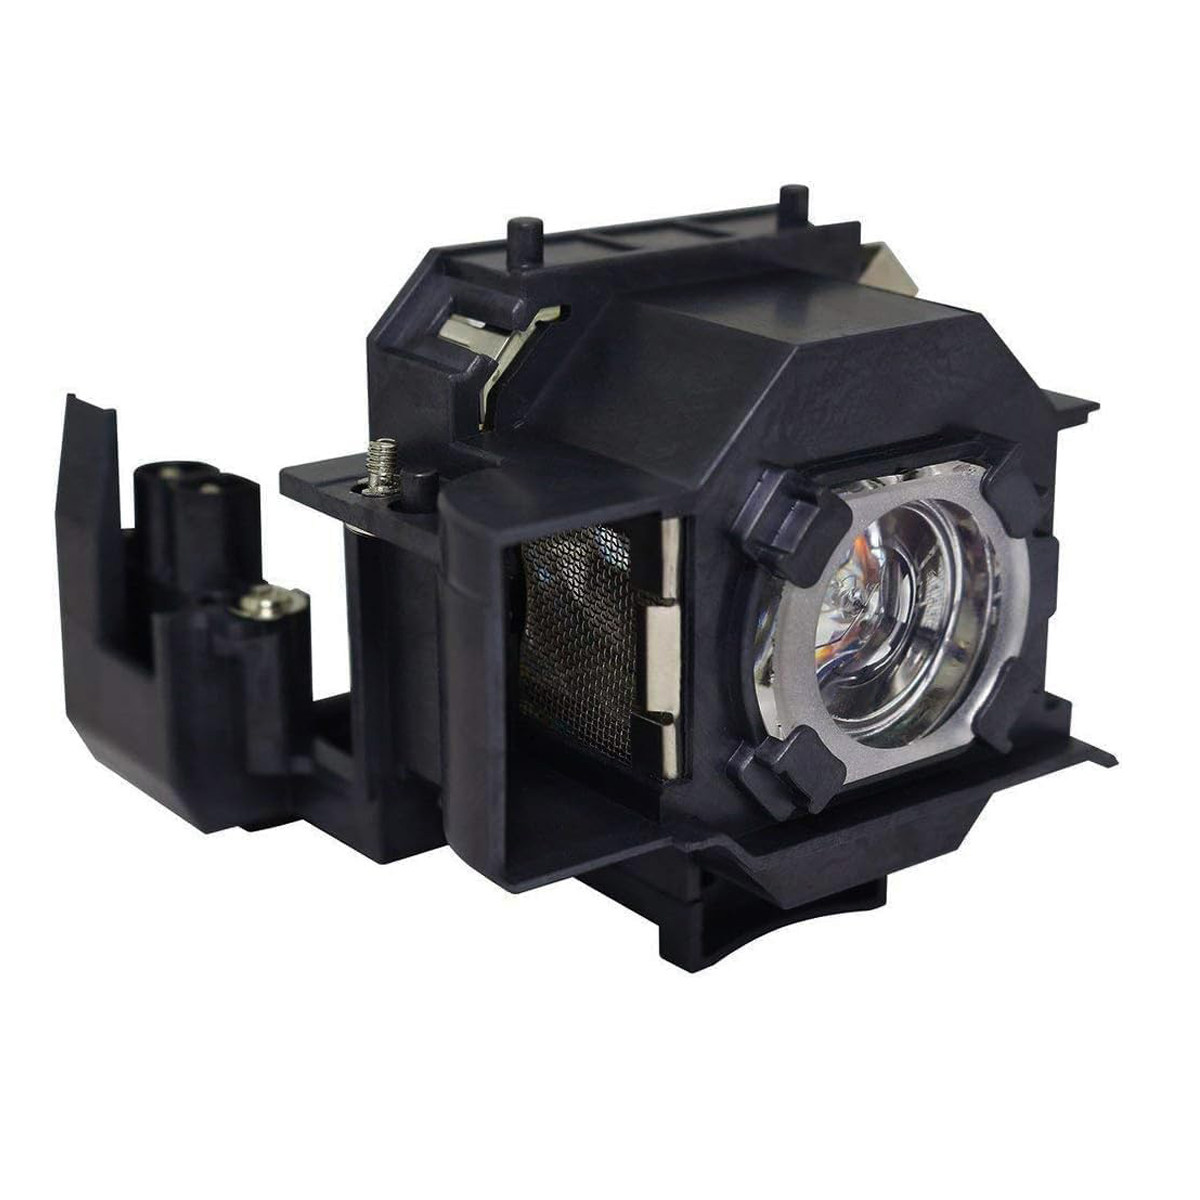 Replacement Projector lamp ELPLP34 For Epson EMP-62 EMP-62C EMP-63 EMP-76C